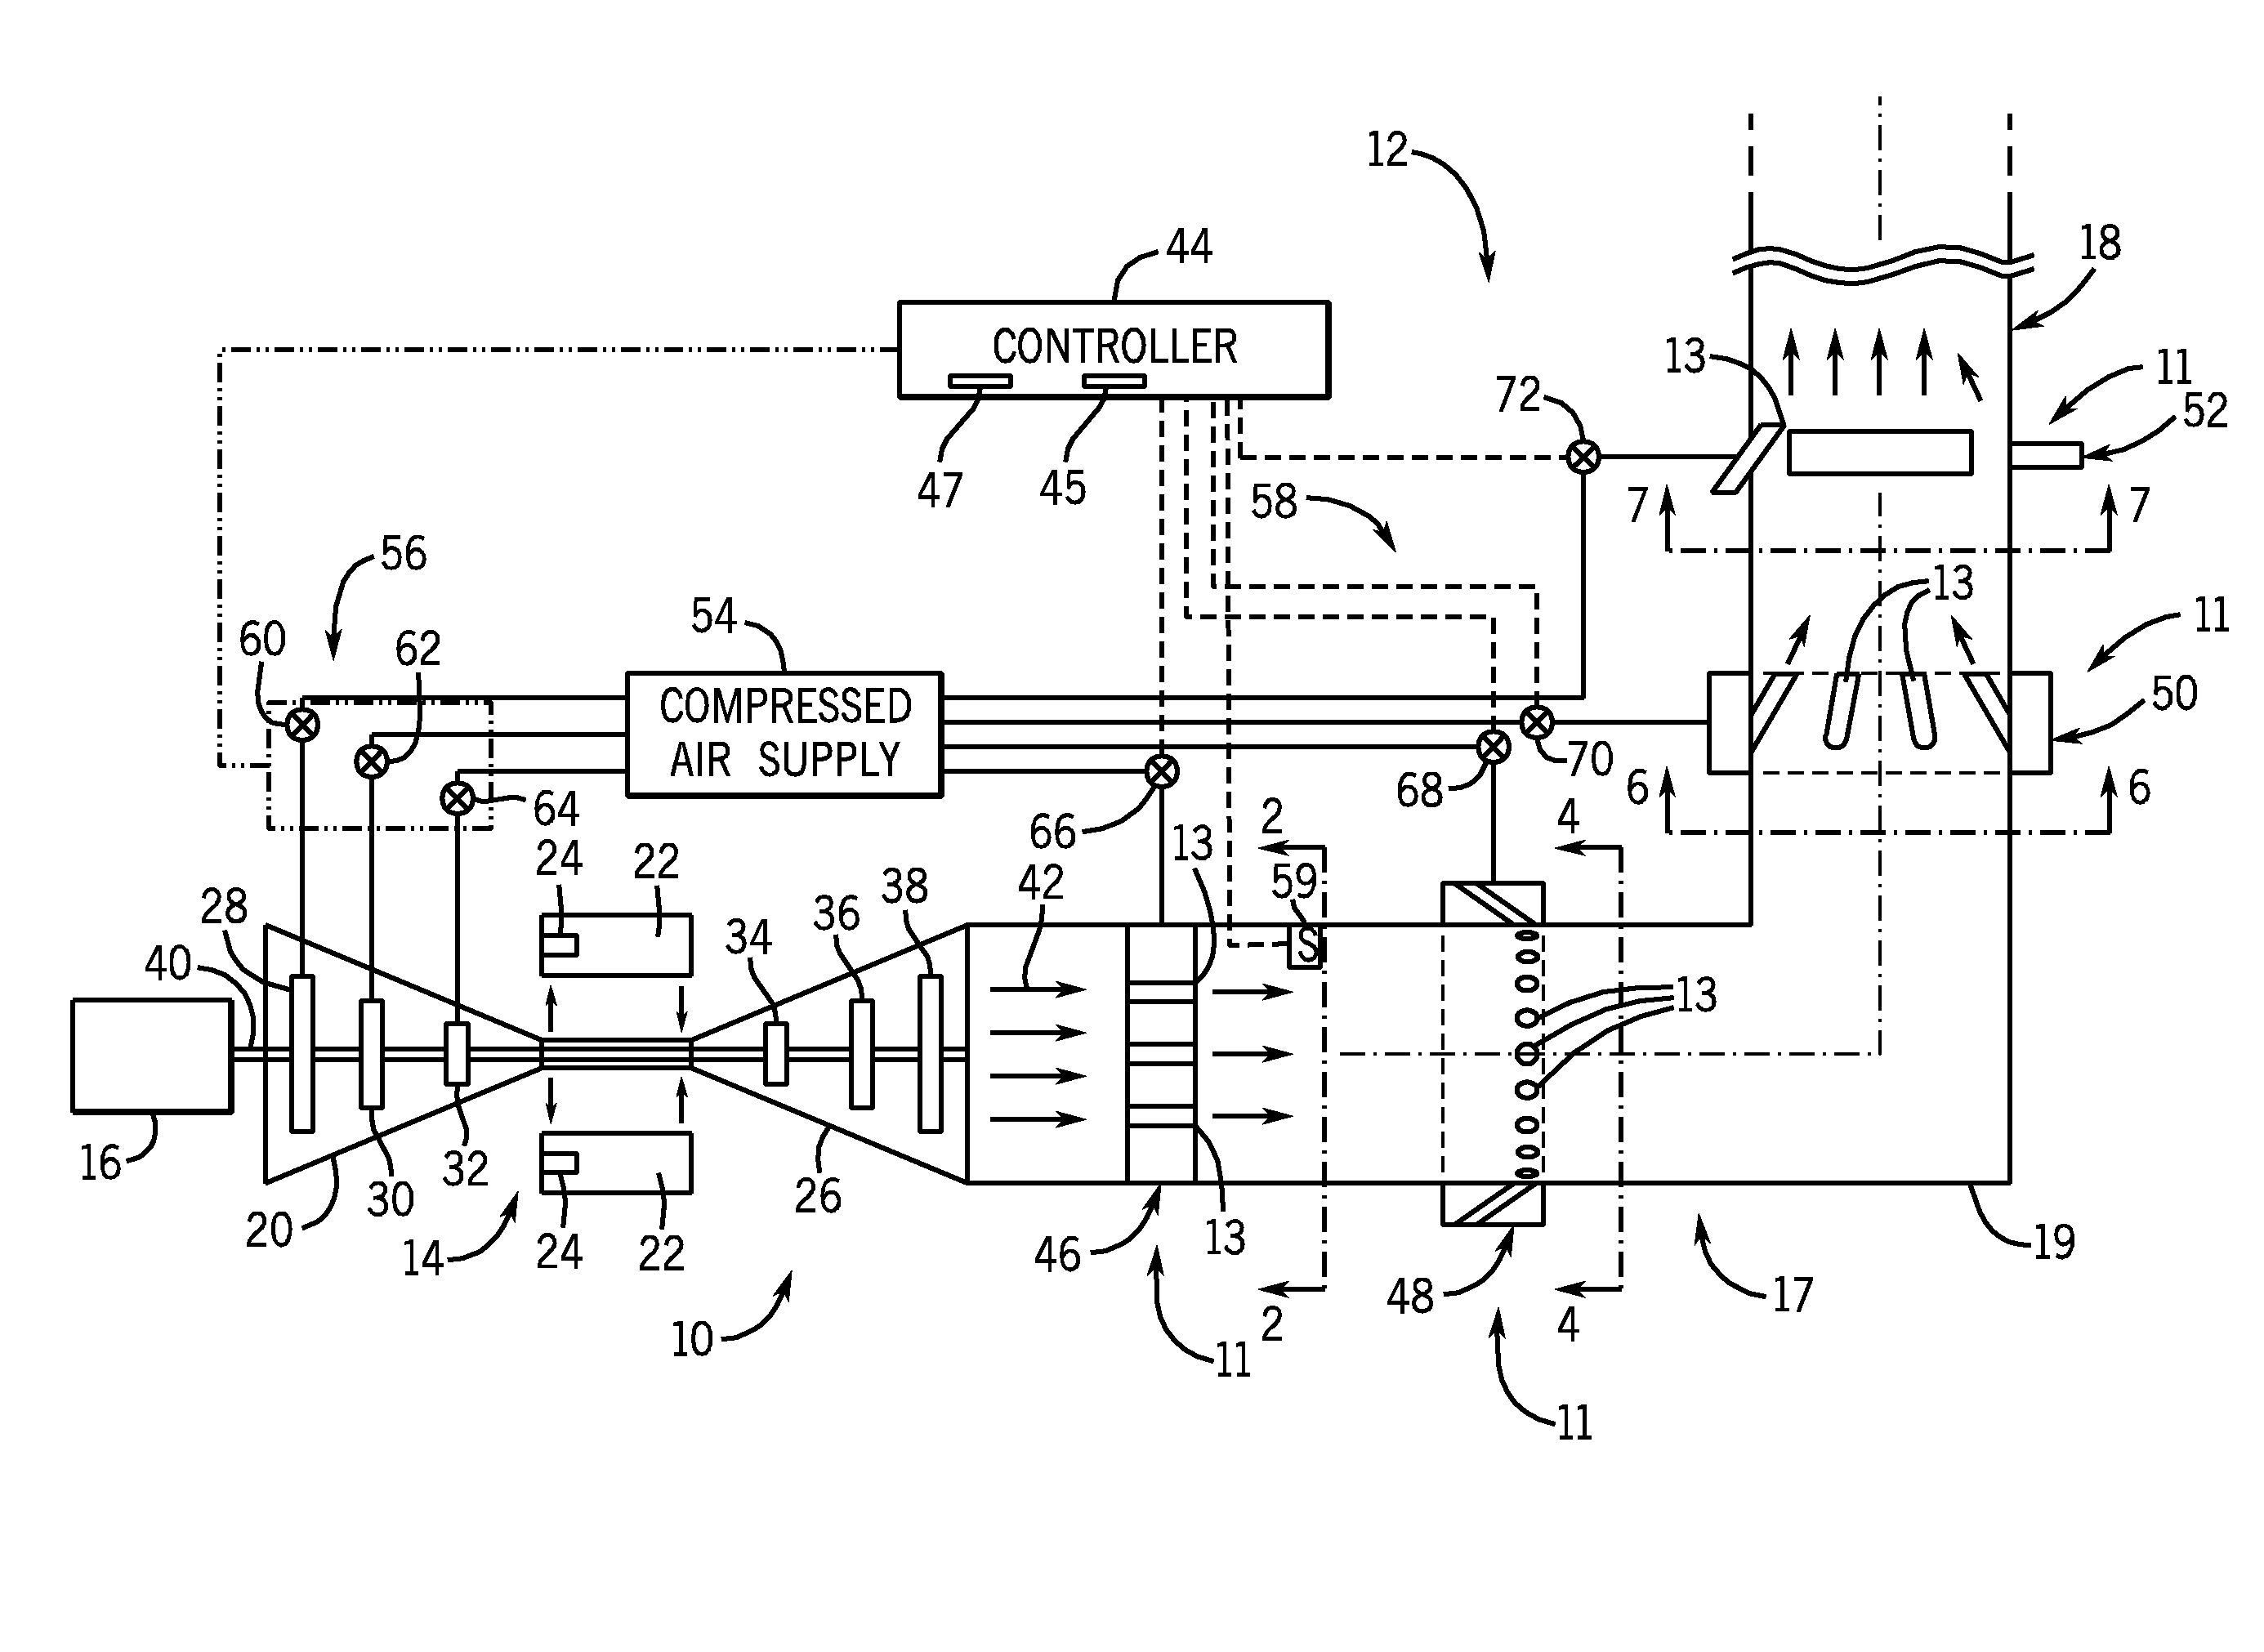 System and Method for Reducing Back Pressure in a Gas Turbine System